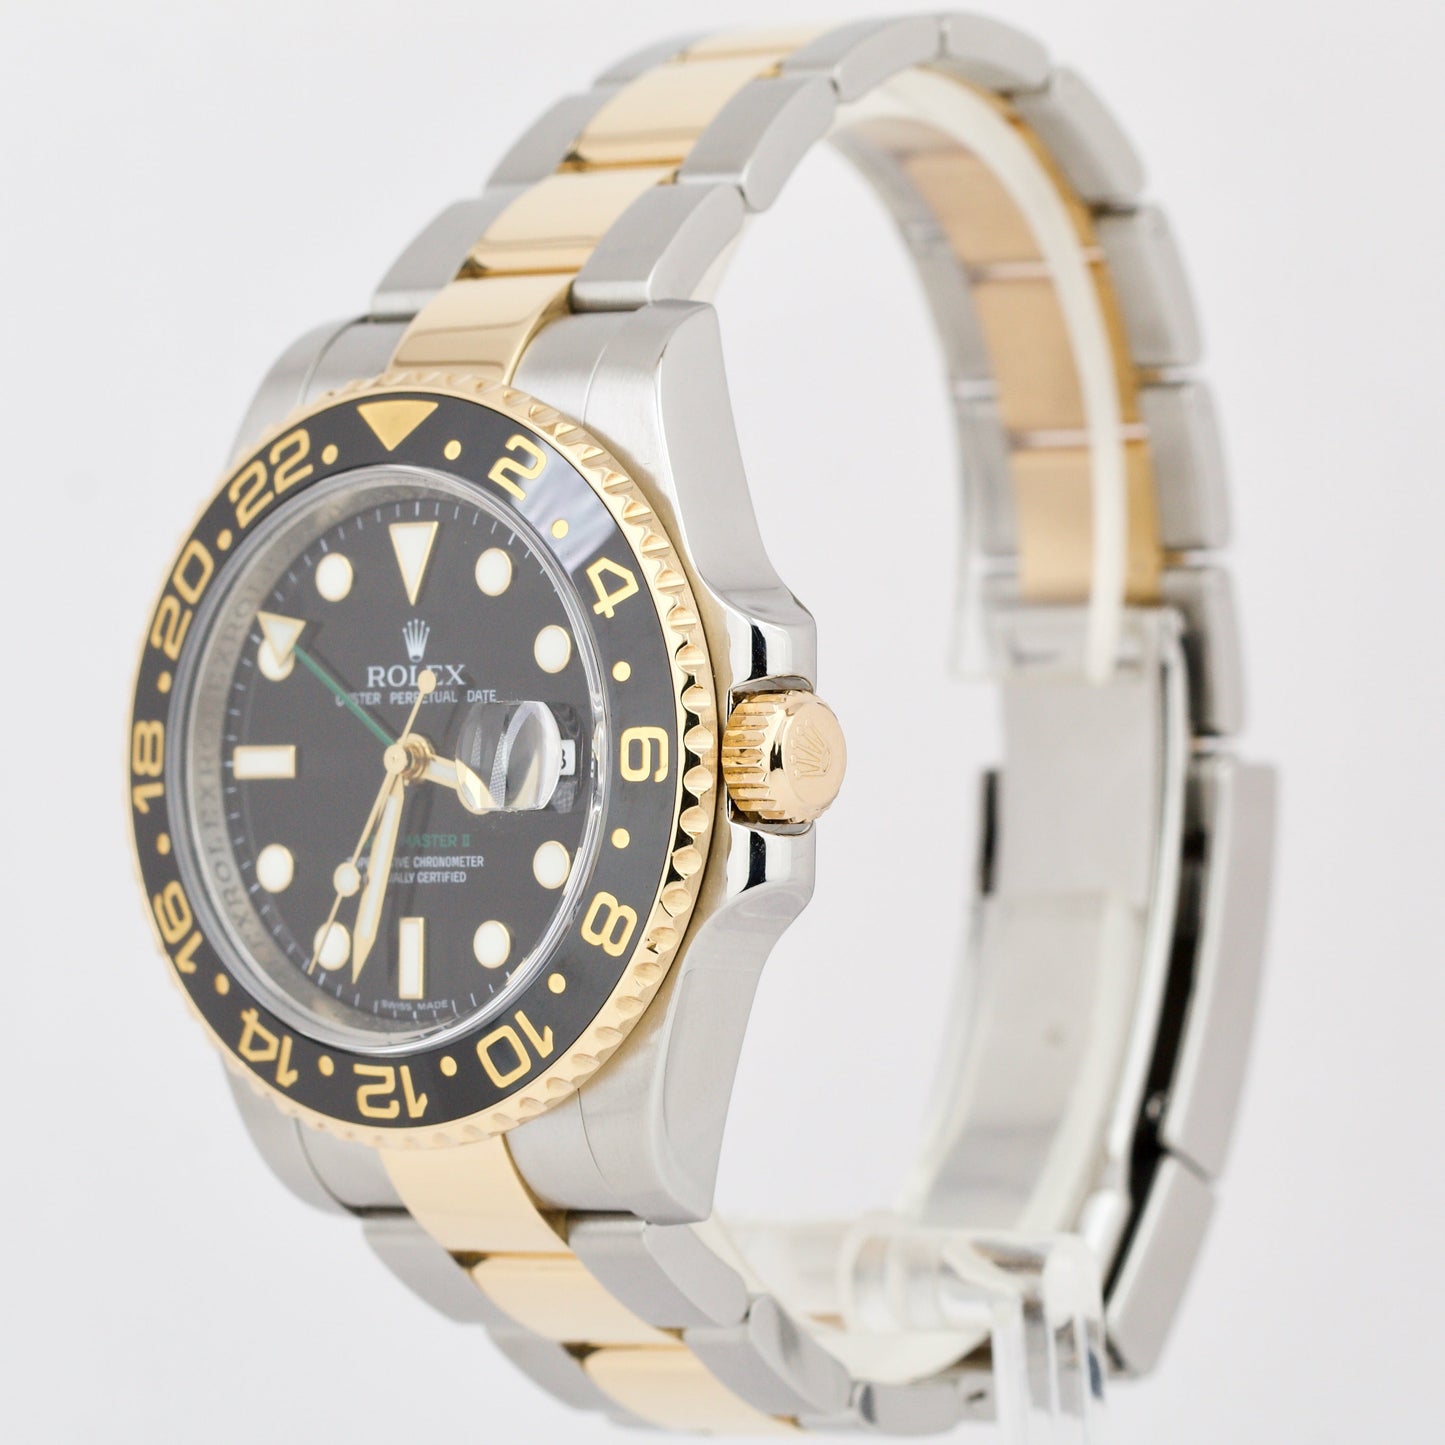 Rolex GMT-Master II Ceramic 116713 Black Two-Tone 18K Stainless Date 40mm Watch